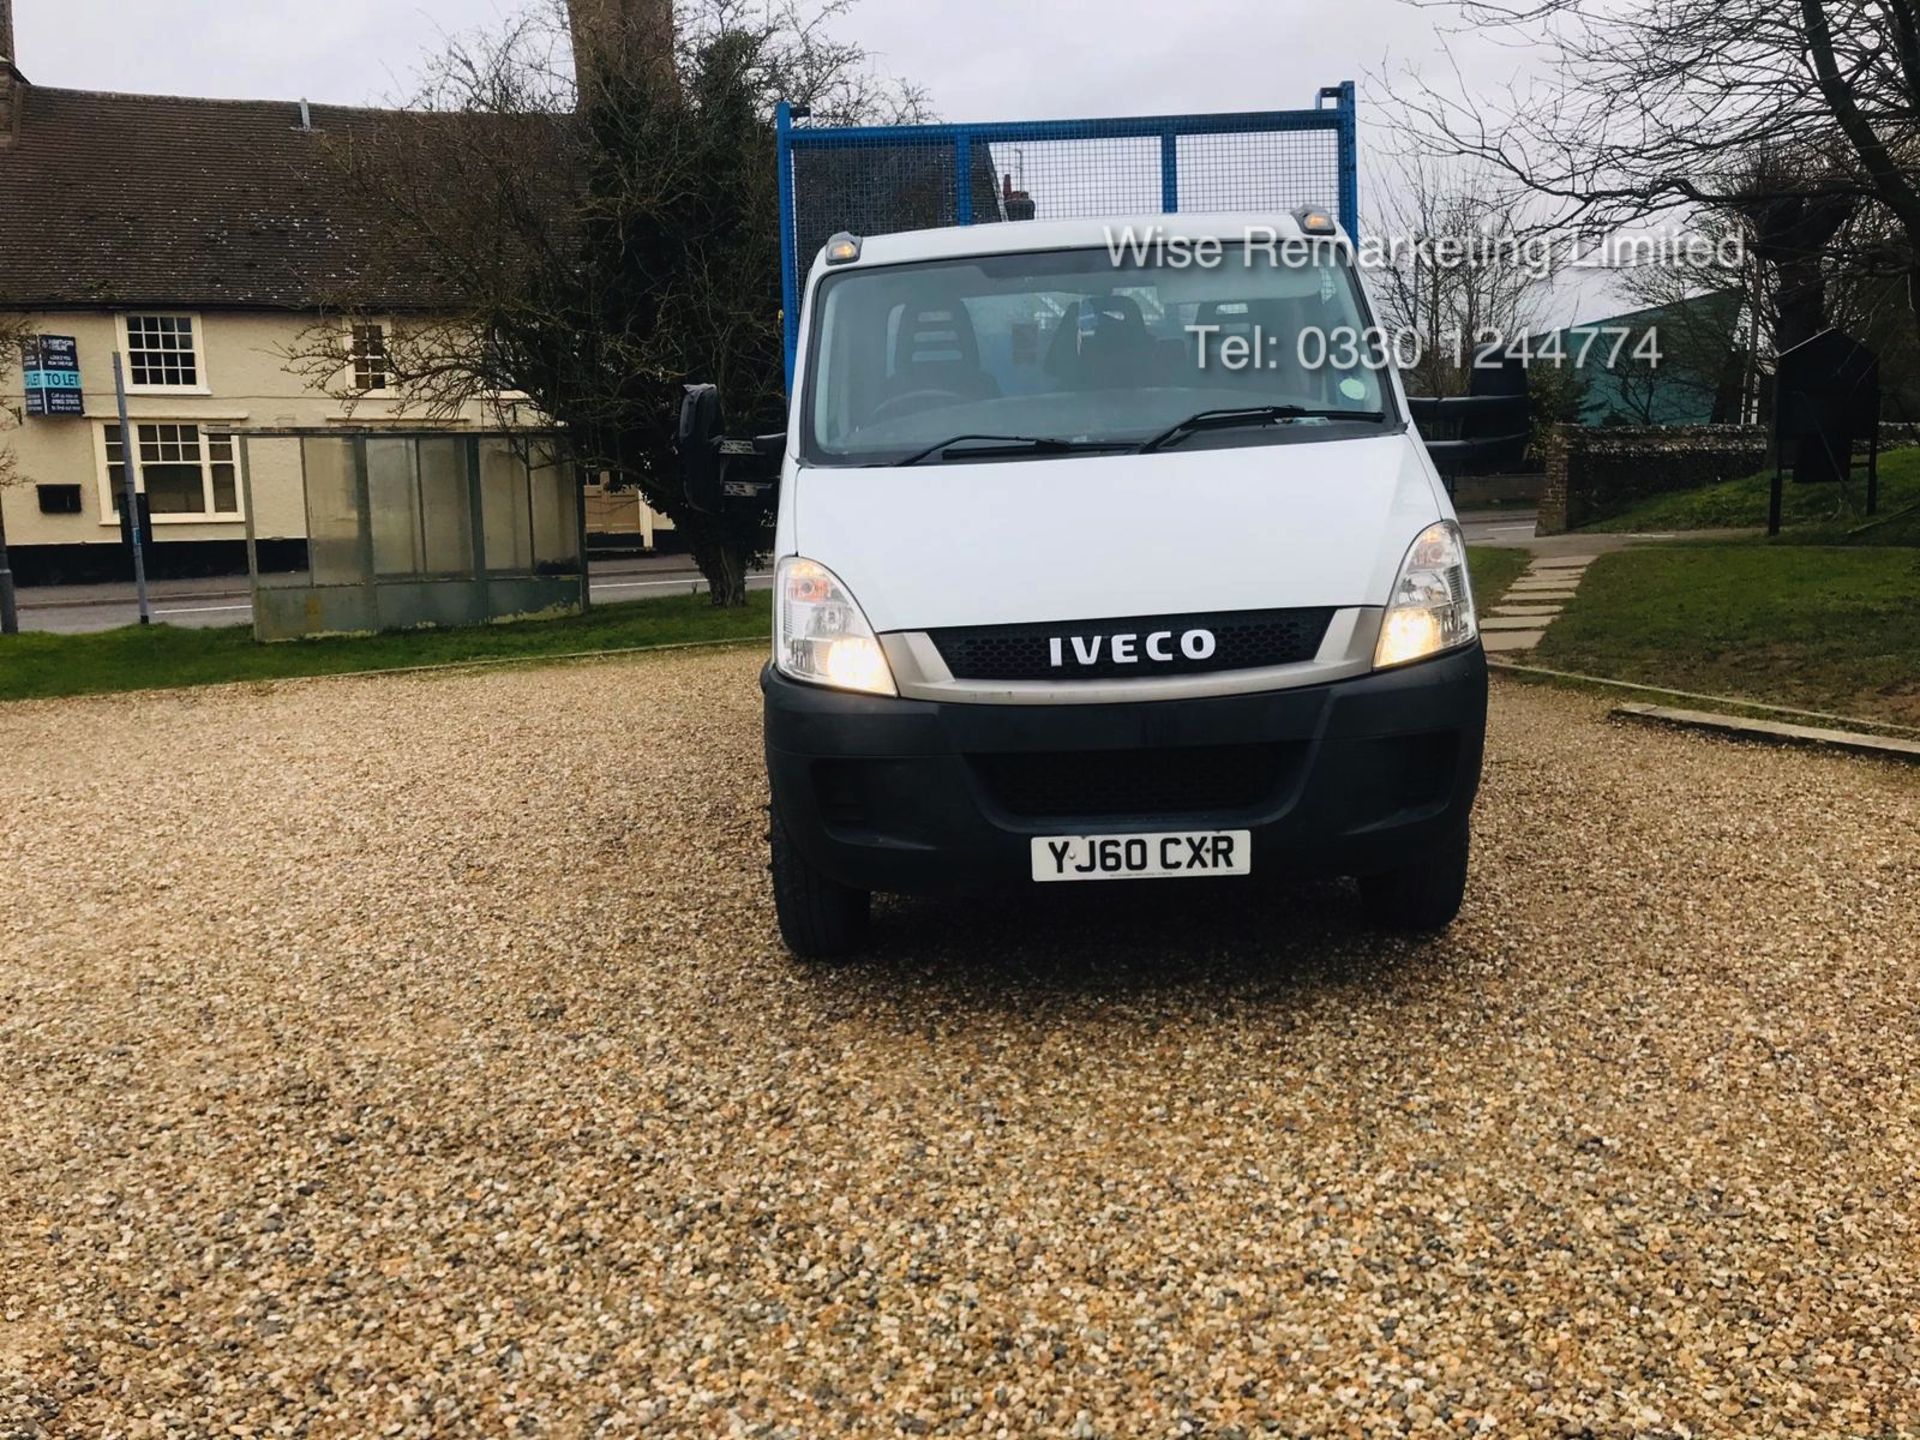 Iveco Daily 3.0 TD 60C18 Tipper (Twin Wheeler) - 6 Speed - 2011 Model - 1 Keeper SAVE 20% NO VAT - Image 5 of 18